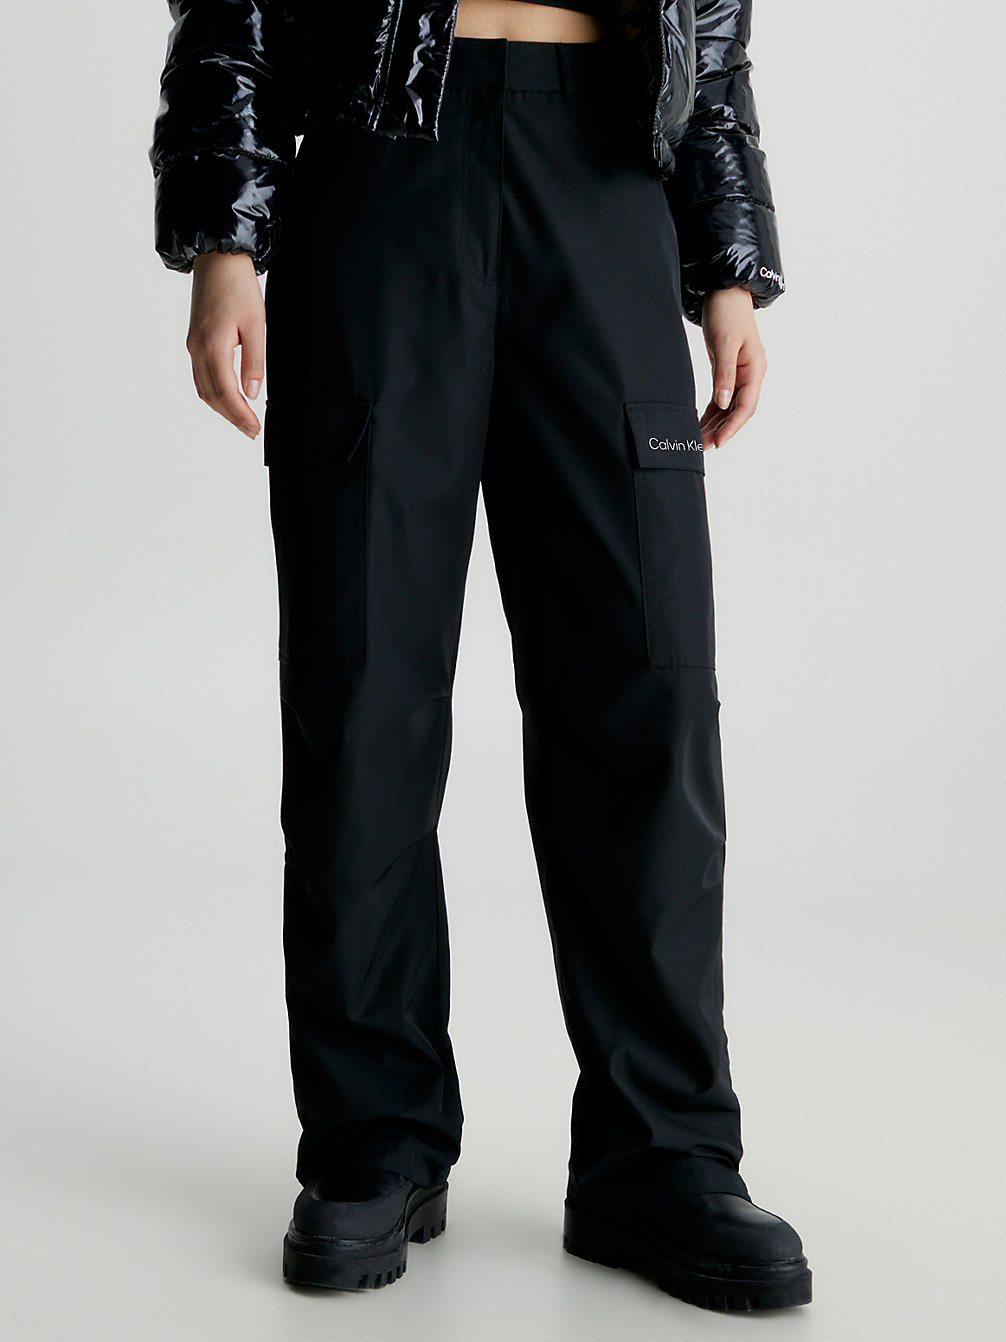 CK BLACK Relaxed Straight Cargo Pants undefined women Calvin Klein